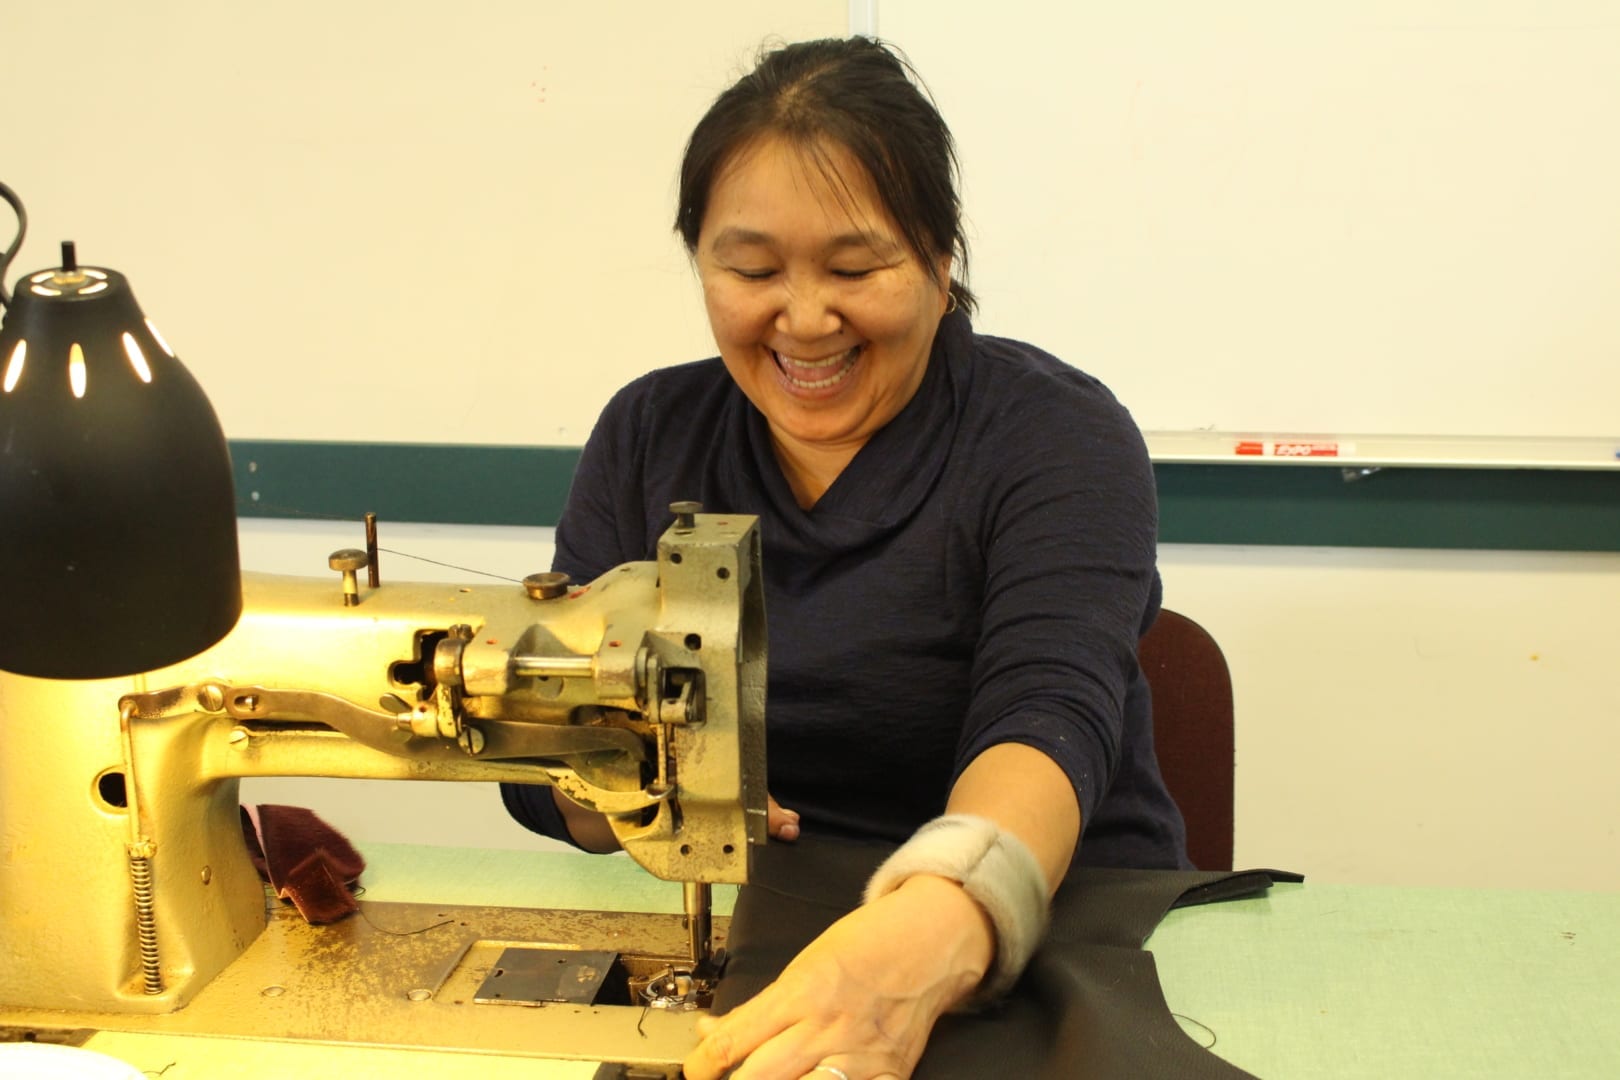 Susie Nakashuk-Zettler "showing off her good side" while sewing a piece of seal skin. She said being involved in the workshop and being surrounded by wonderful Indigenous artisans brought tears to her eyes. Brett McGarry